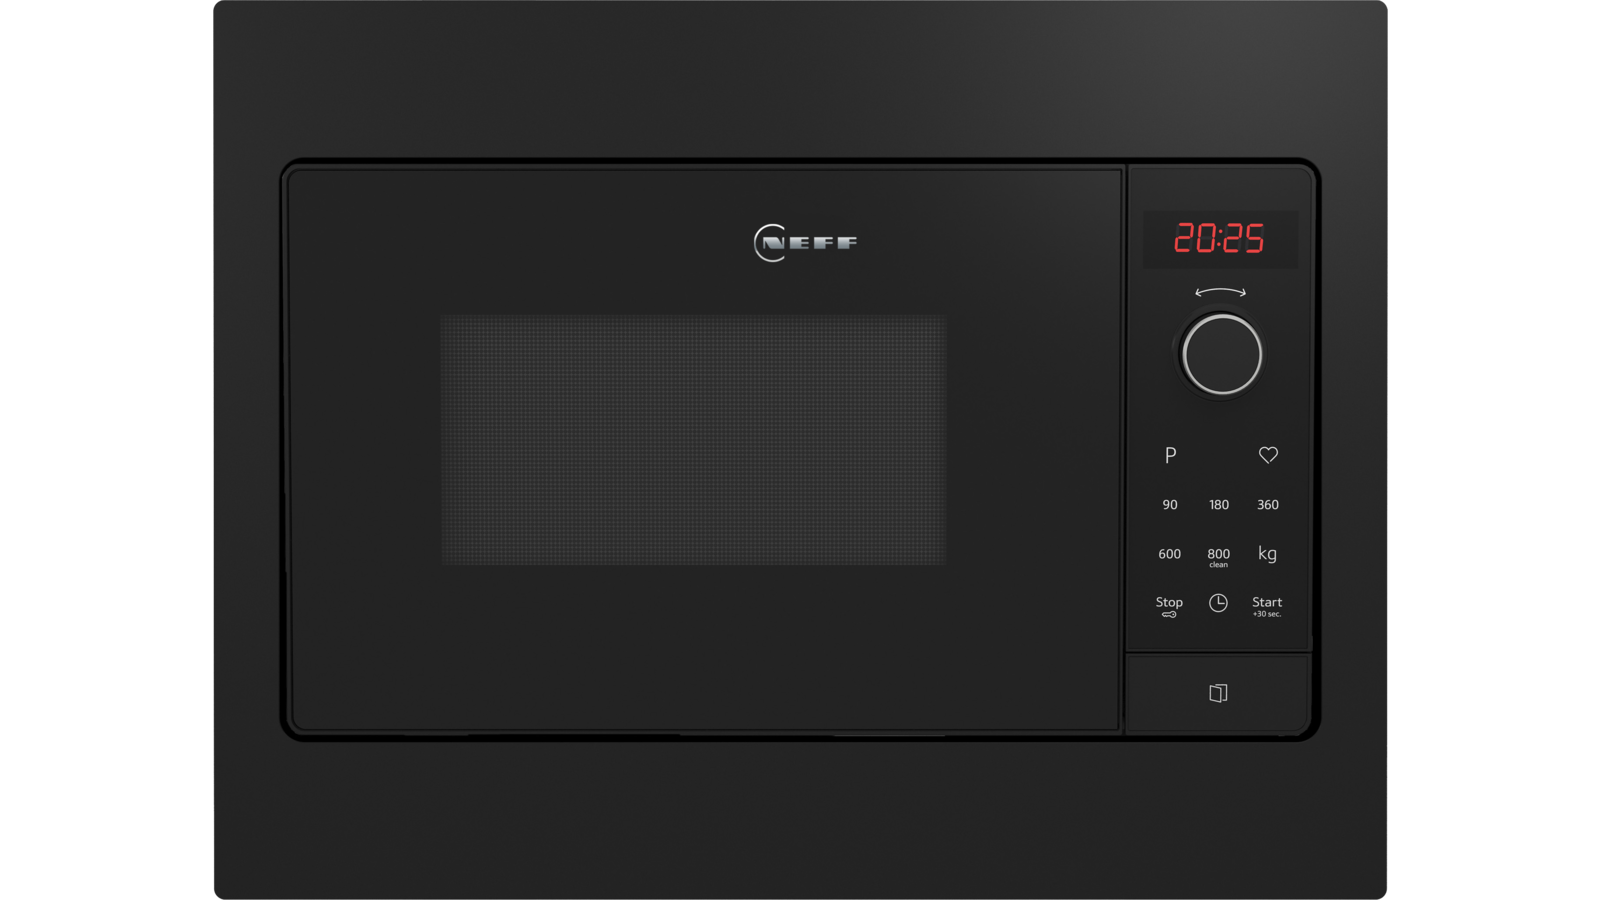 HLAWG25S3B Built-in microwave oven | GB NEFF